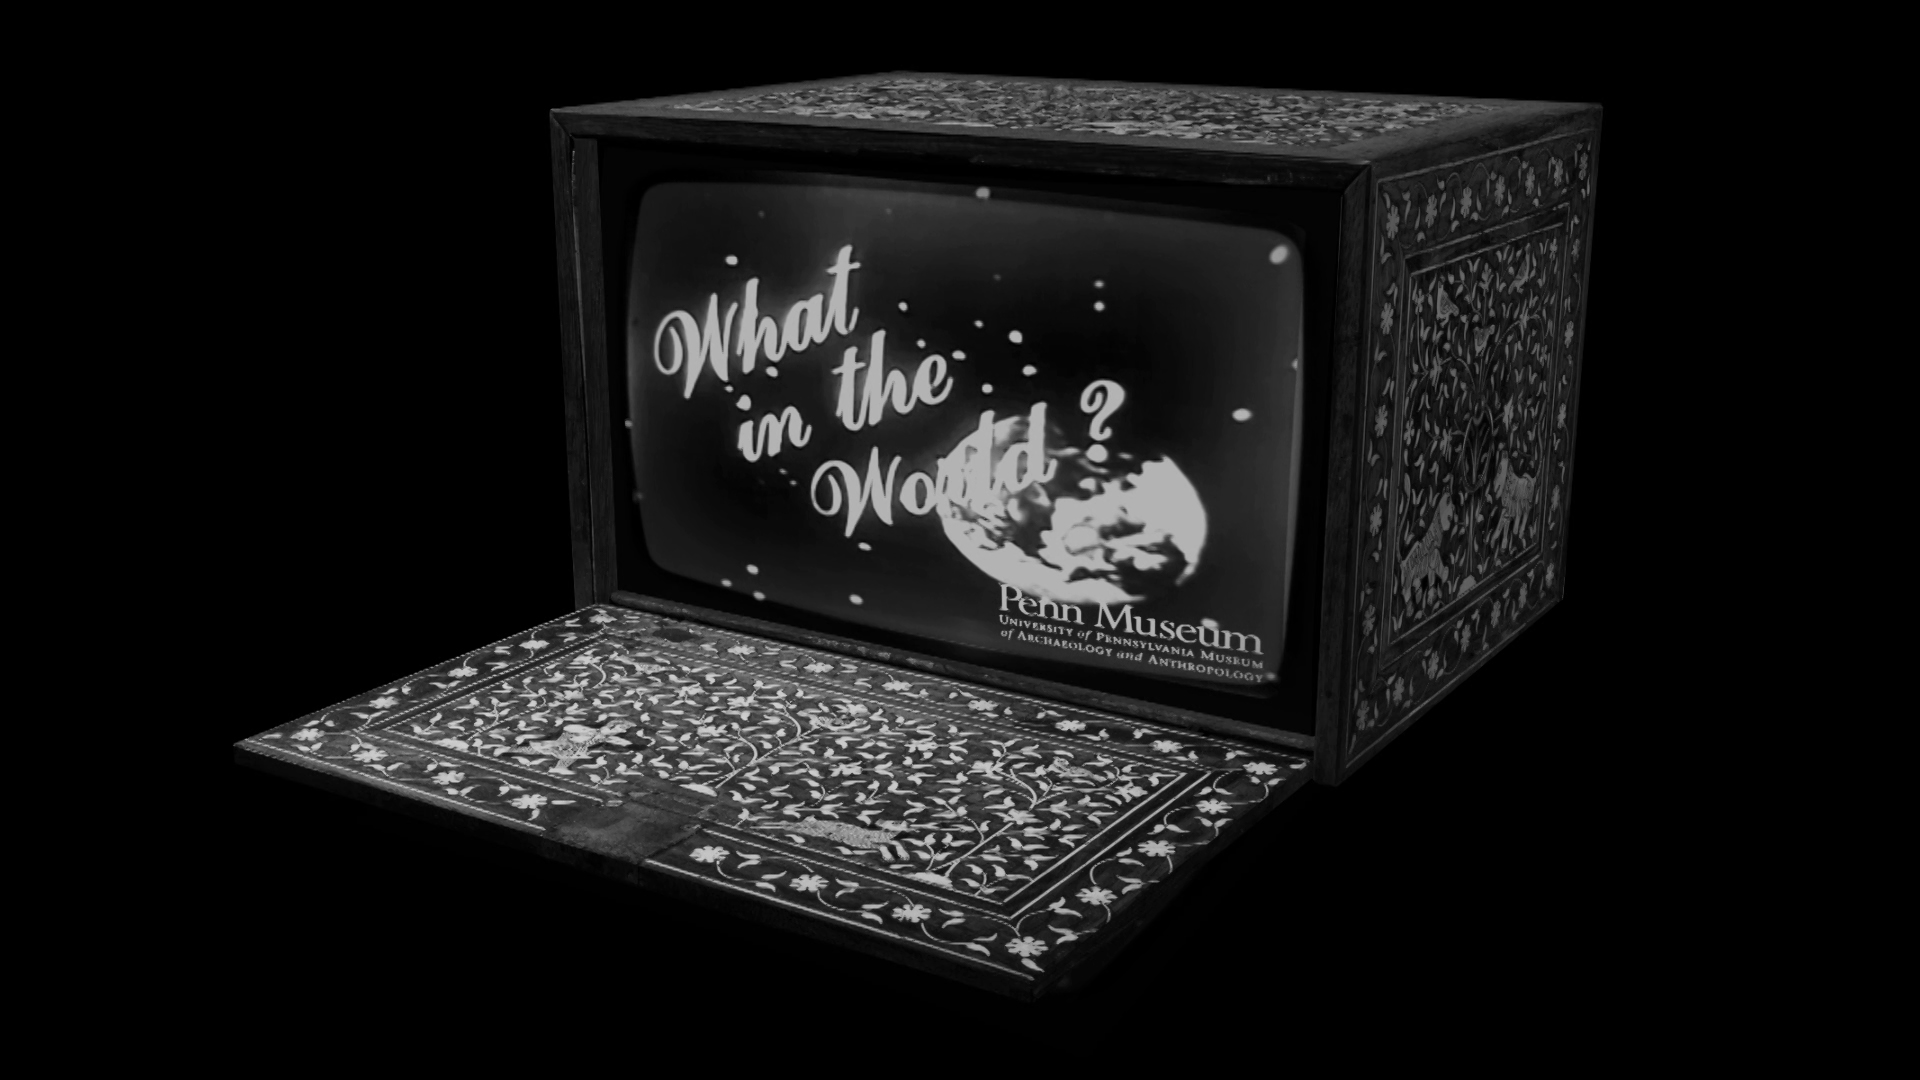 "What in the World" (video still)
2013,
single-channel HD video &  animation, 
black and white, 
stereo sound,
duration 5:30 min,
dimensions variable